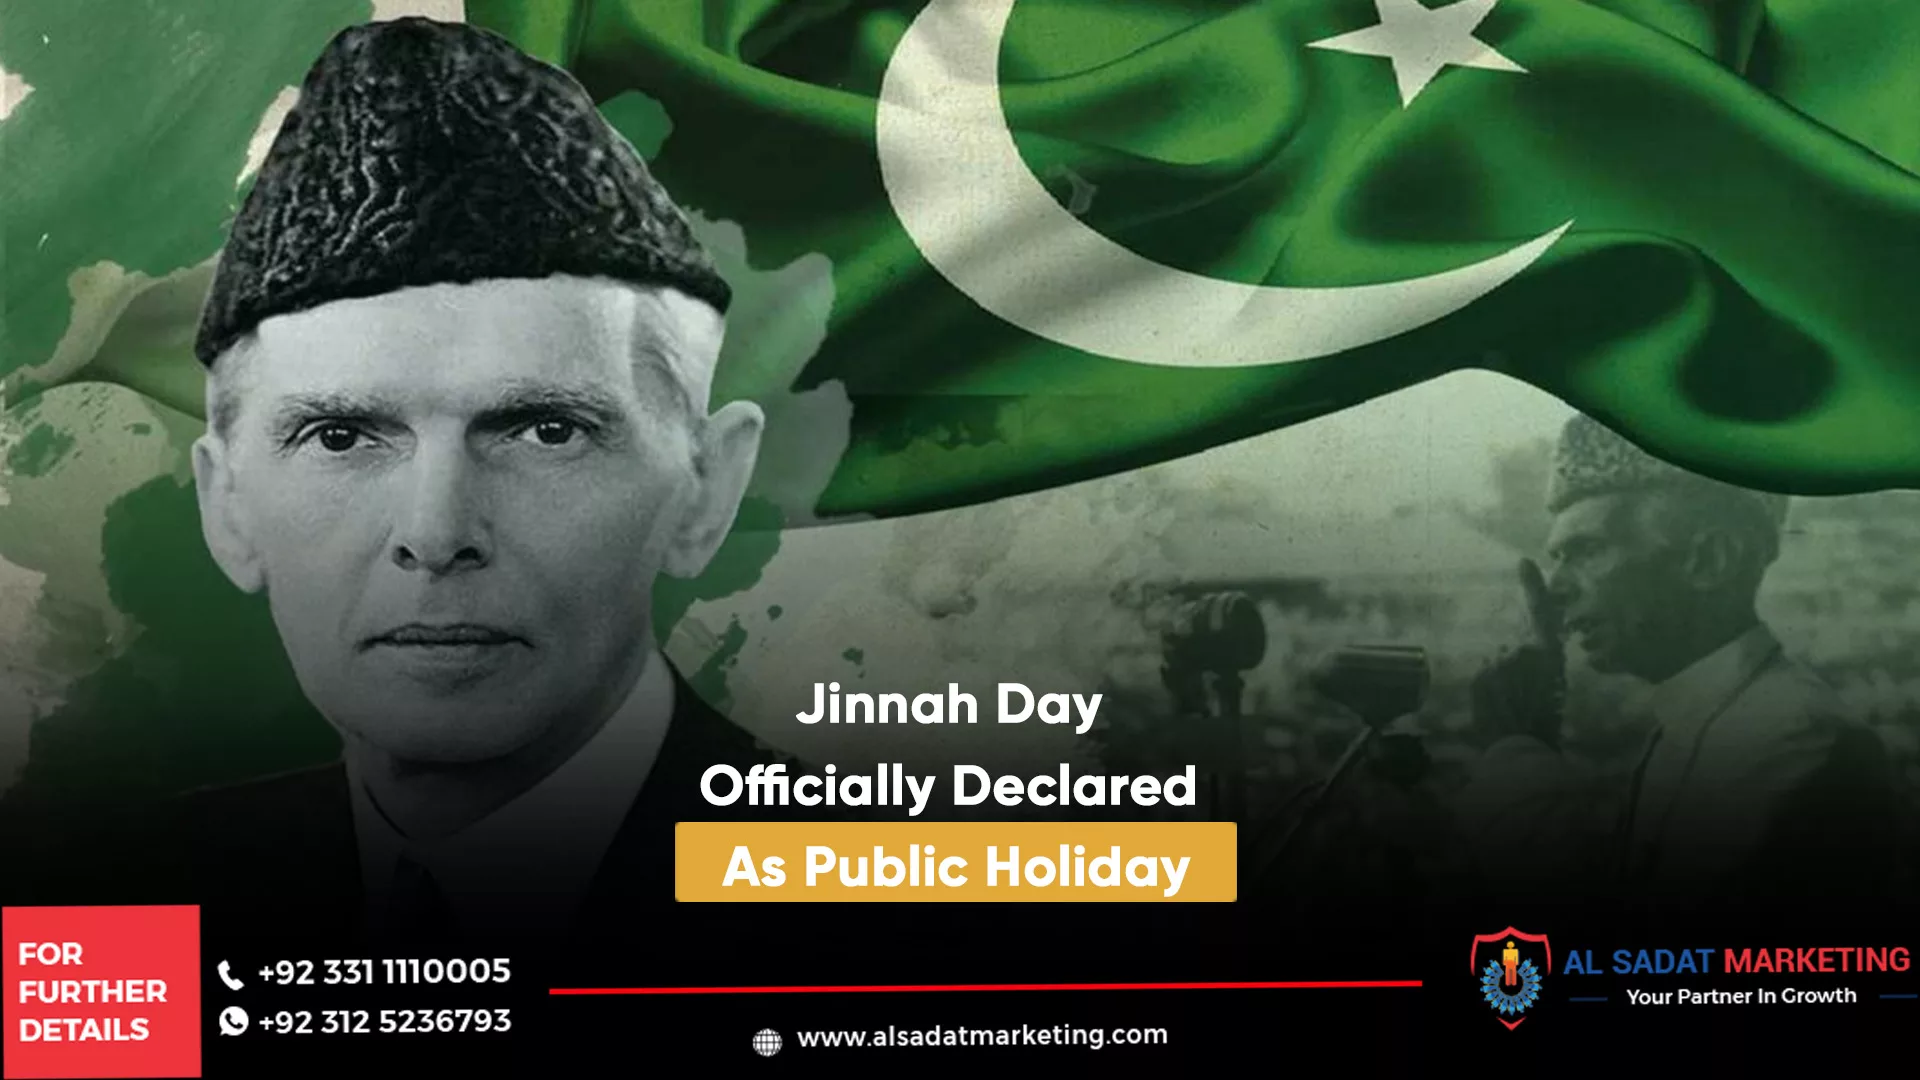 jinnah day officially declared as public holiday, al sadat marketing, real estate agency in blue area islamabad